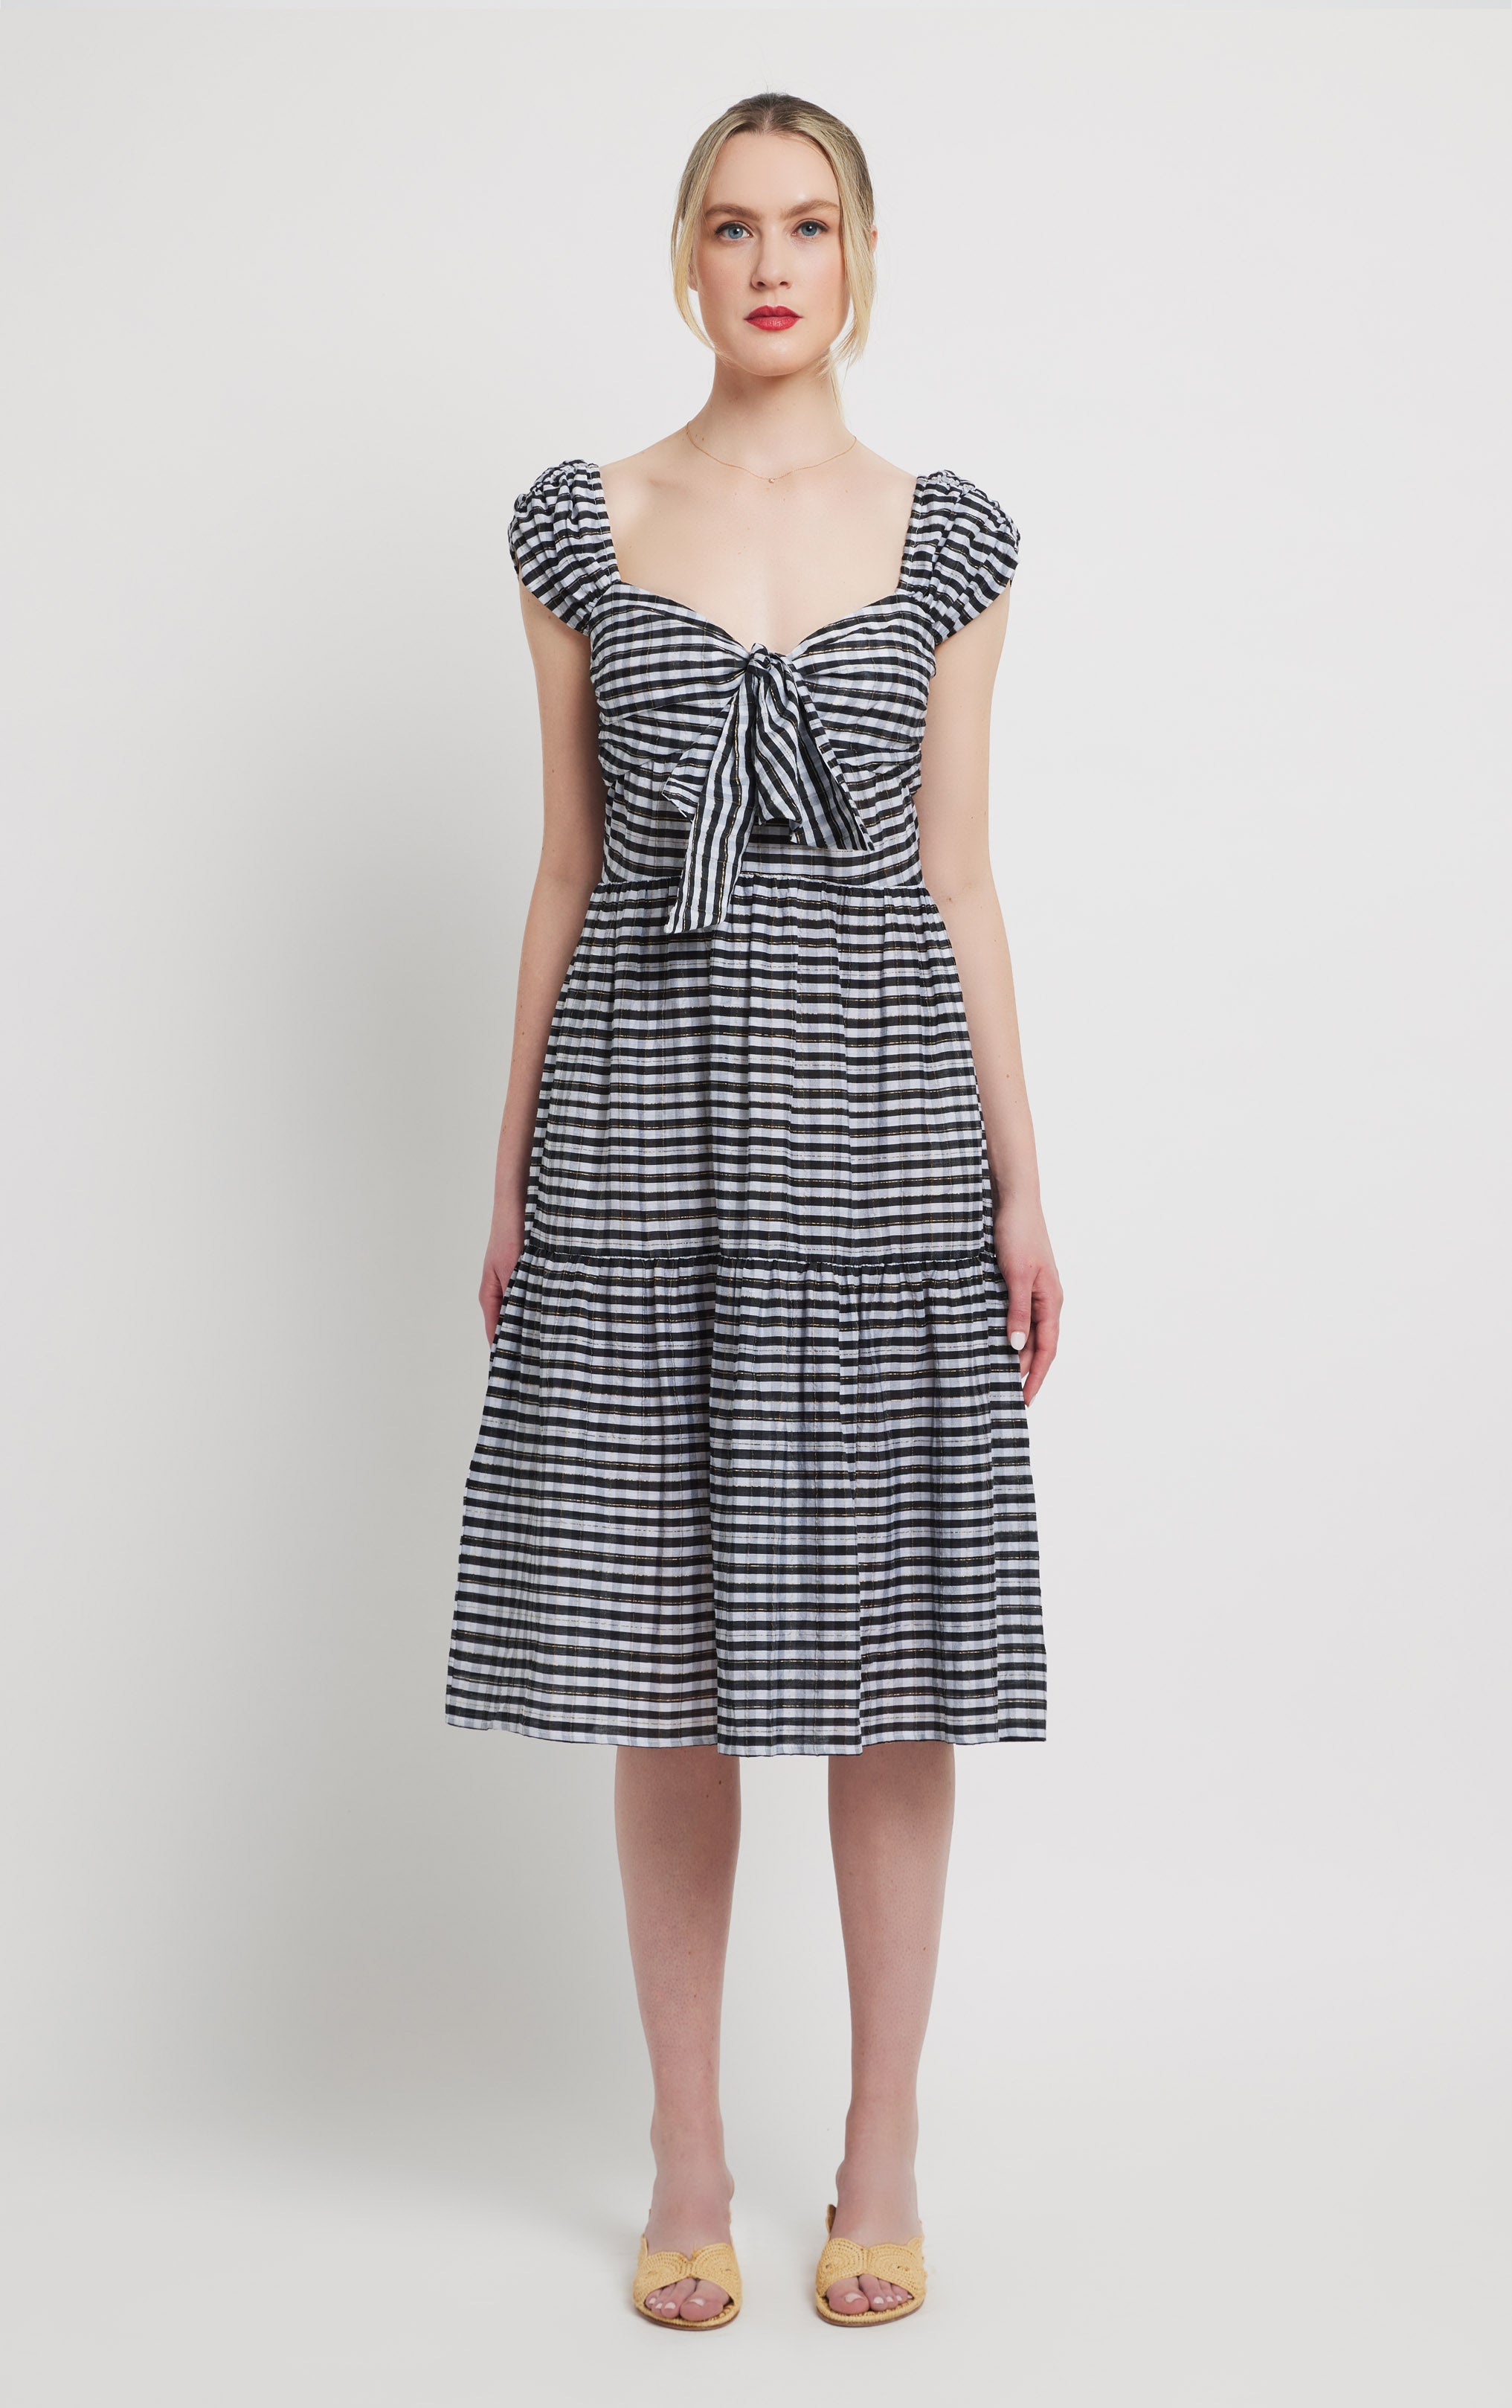 front view of black and white cotton and silk blend dress with pockets, front tie detail and rusched shoulder.